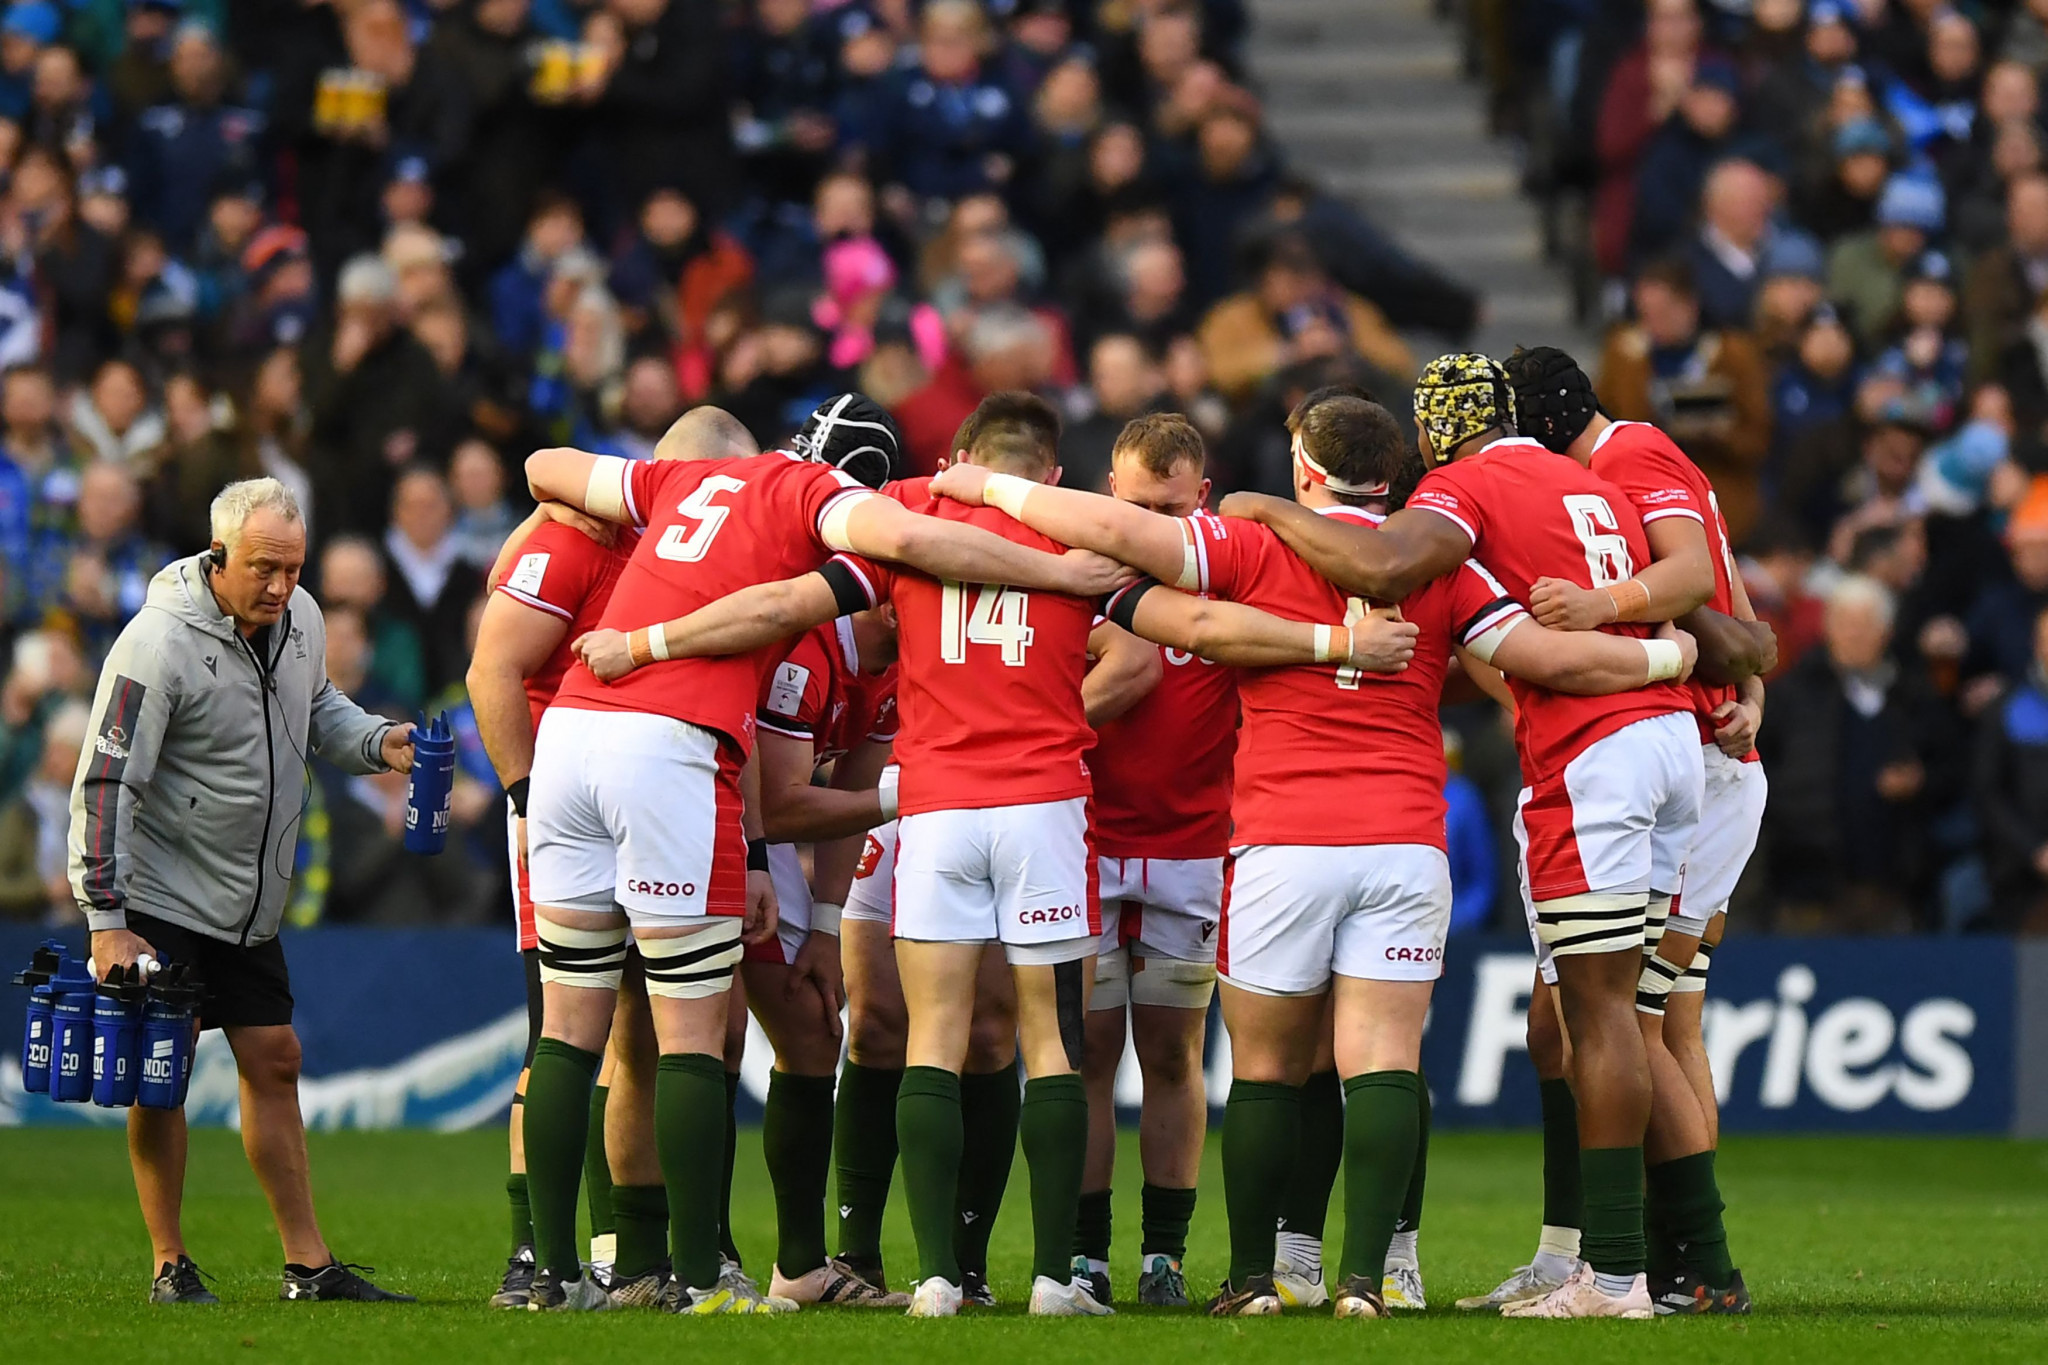 Wales' rugby team has withdrawn its threat of striking against England ©Getty Images